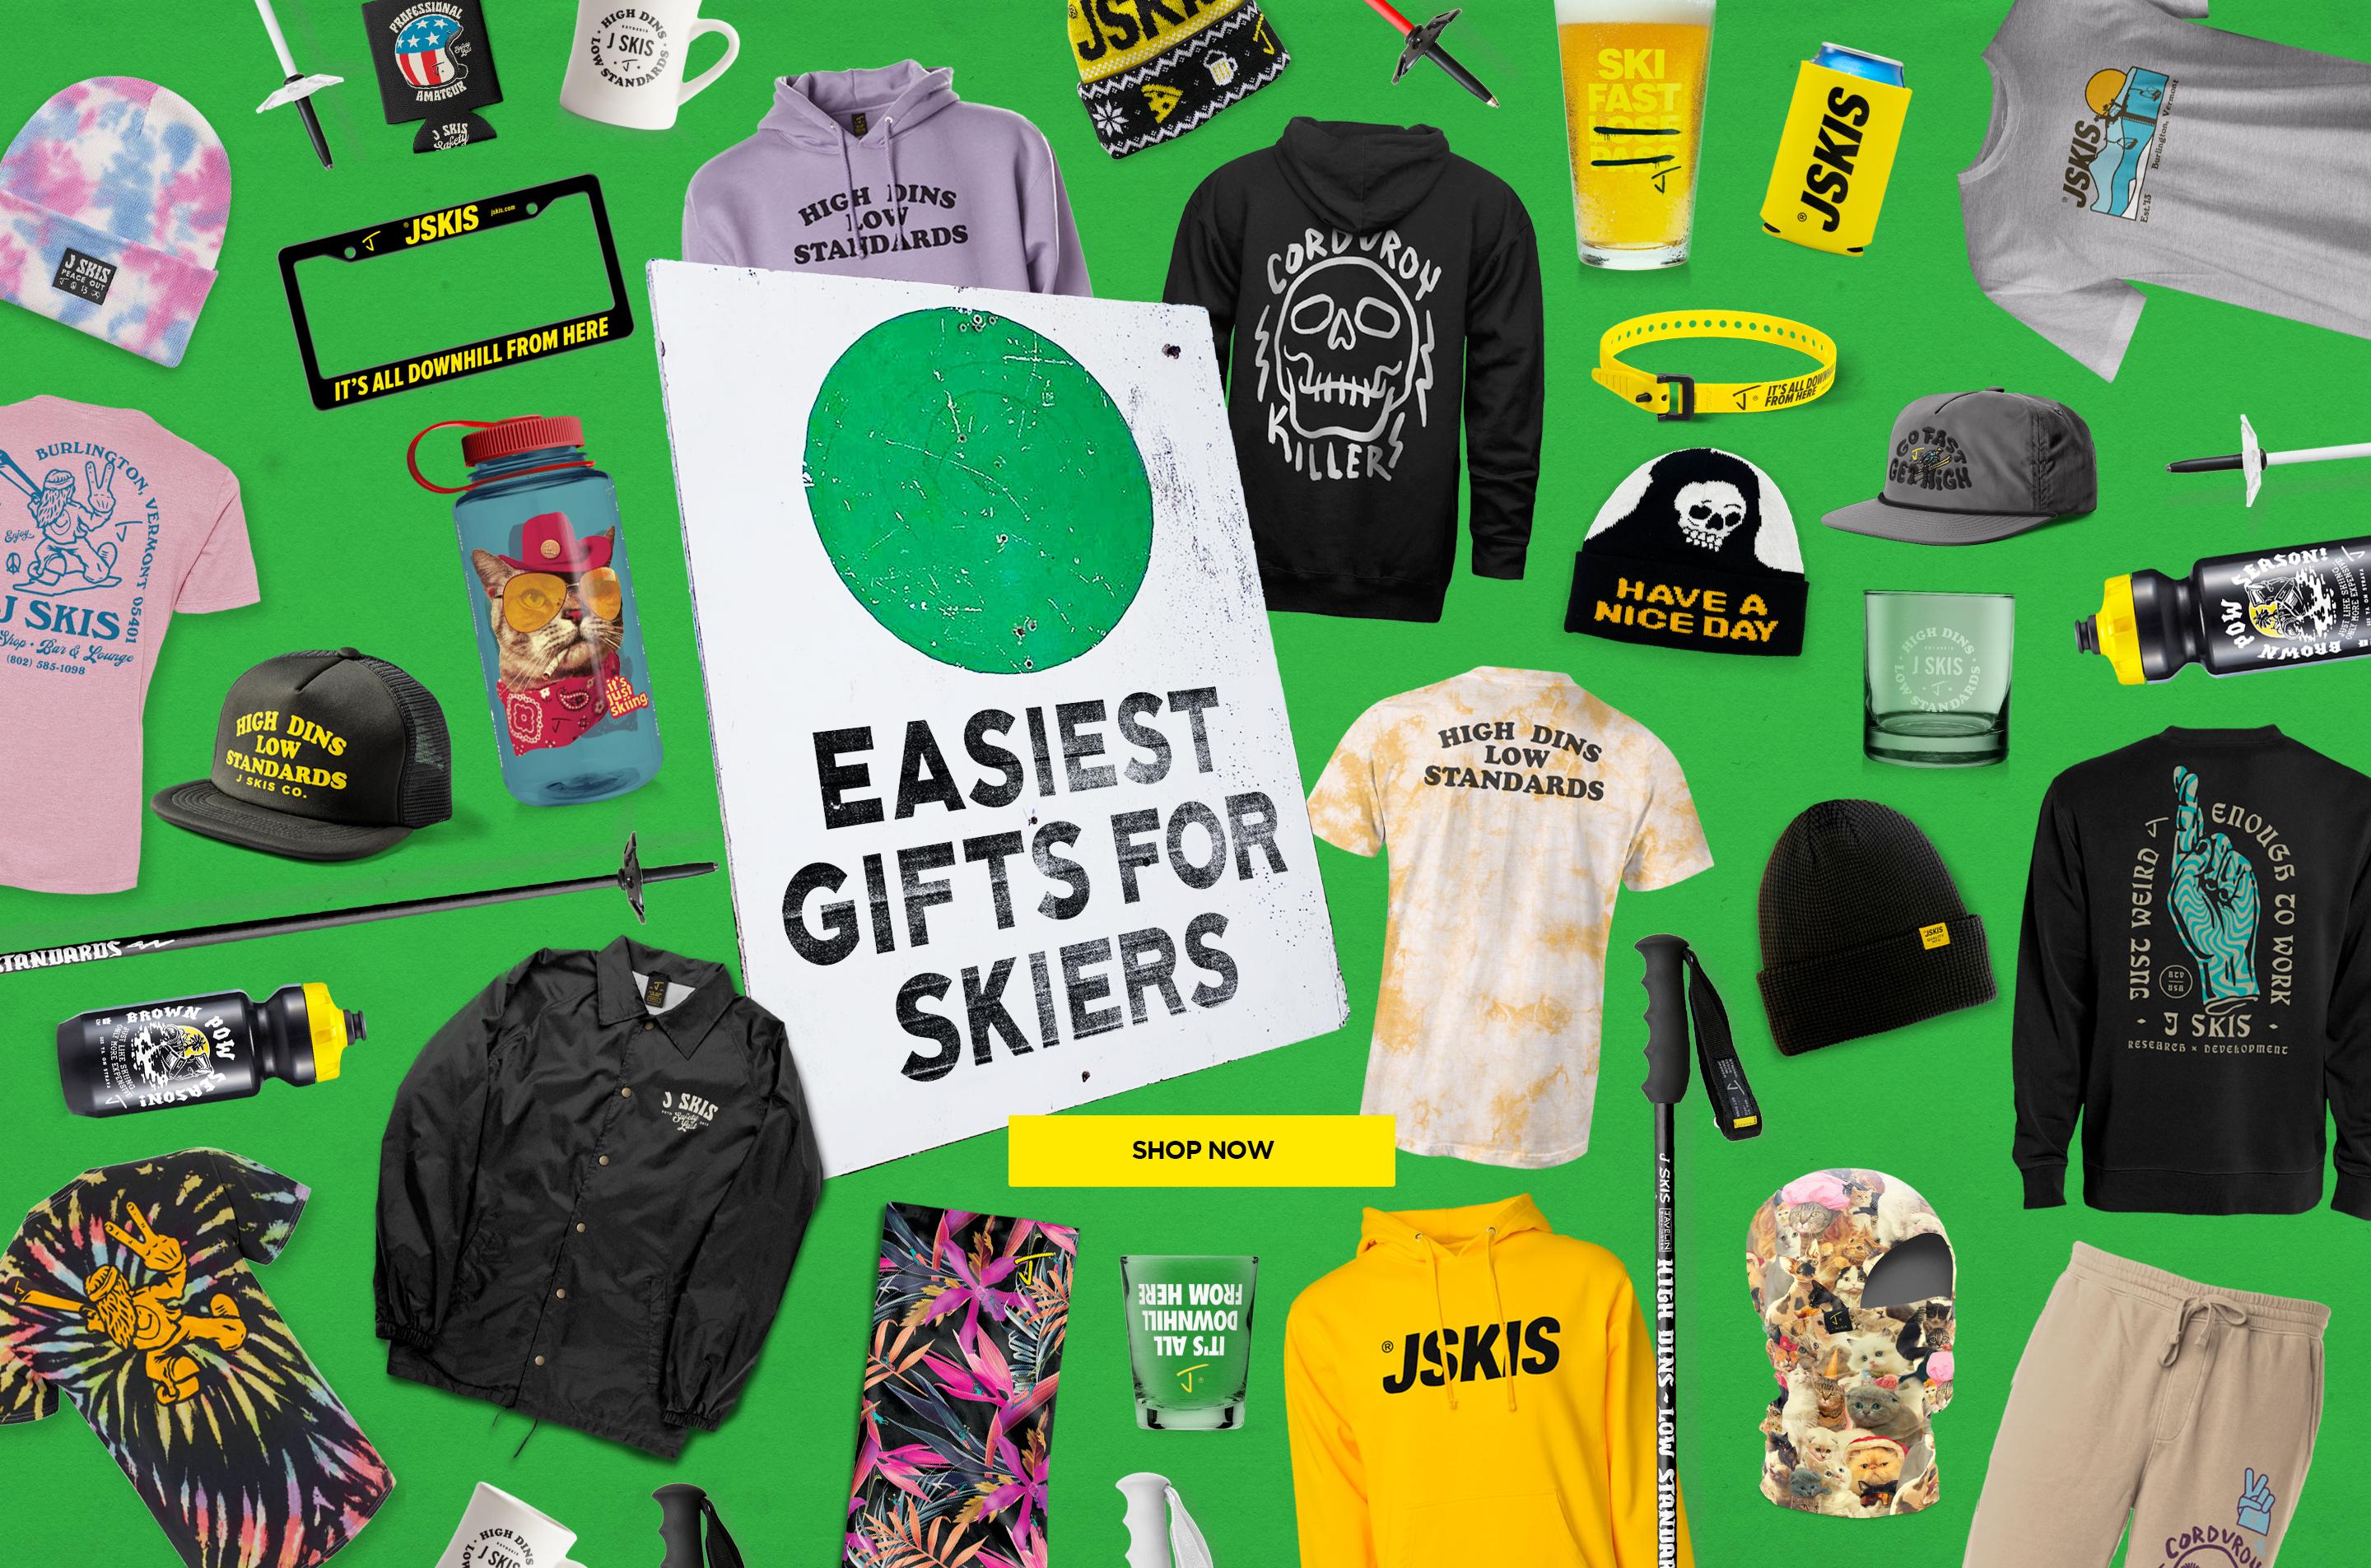 These are the easiest gifts for skiers! 